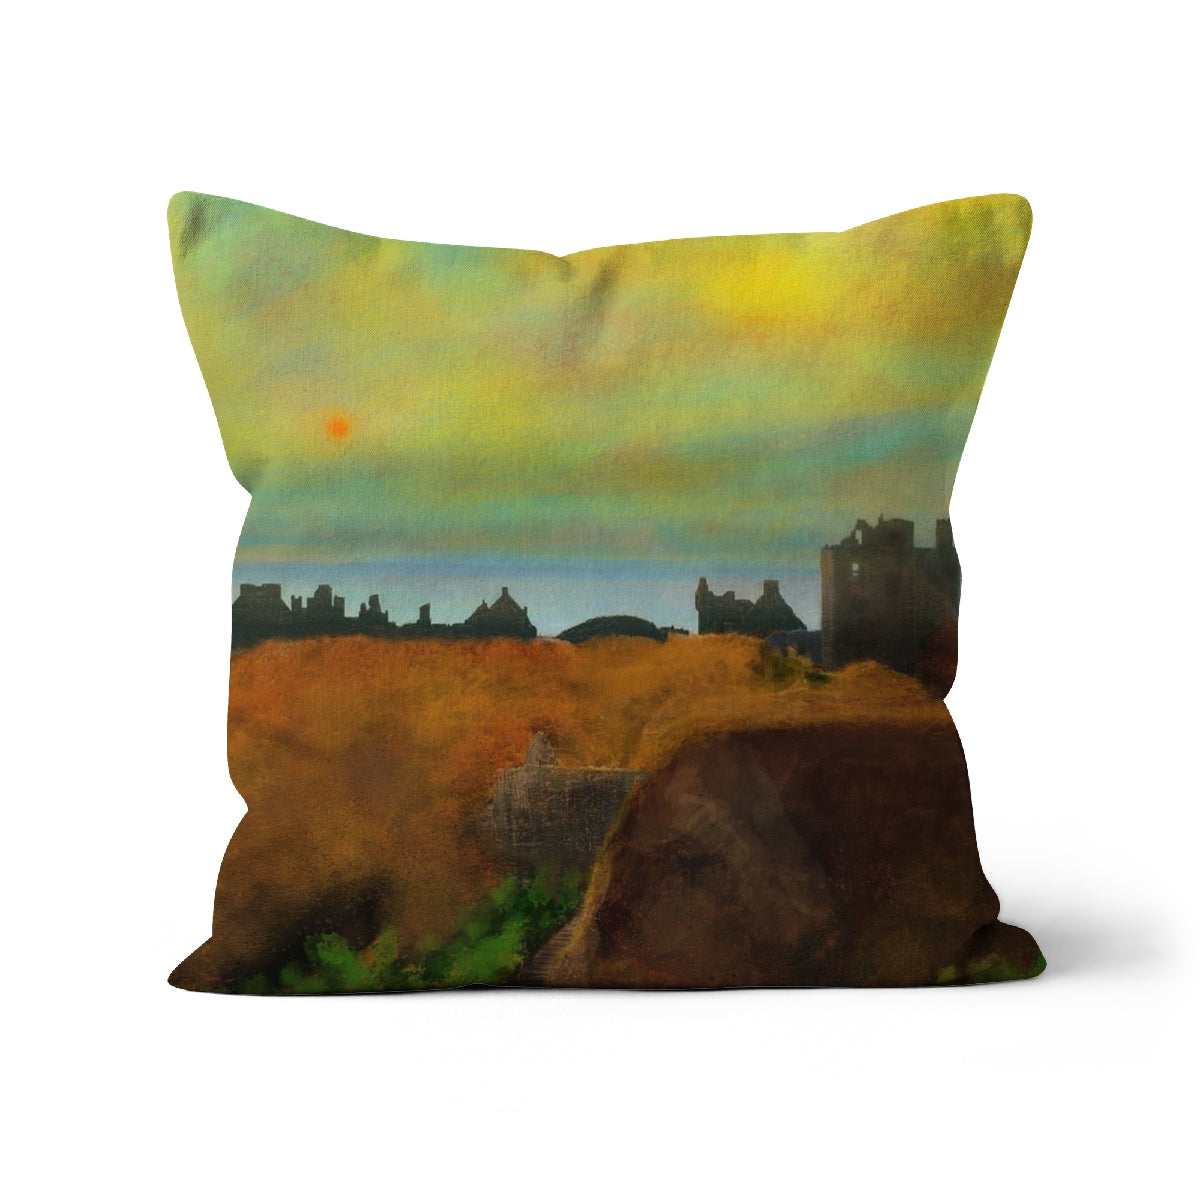 Dunnottar Castle Dusk Art Gifts Cushion-Cushions-Historic & Iconic Scotland Art Gallery-Canvas-12"x12"-Paintings, Prints, Homeware, Art Gifts From Scotland By Scottish Artist Kevin Hunter